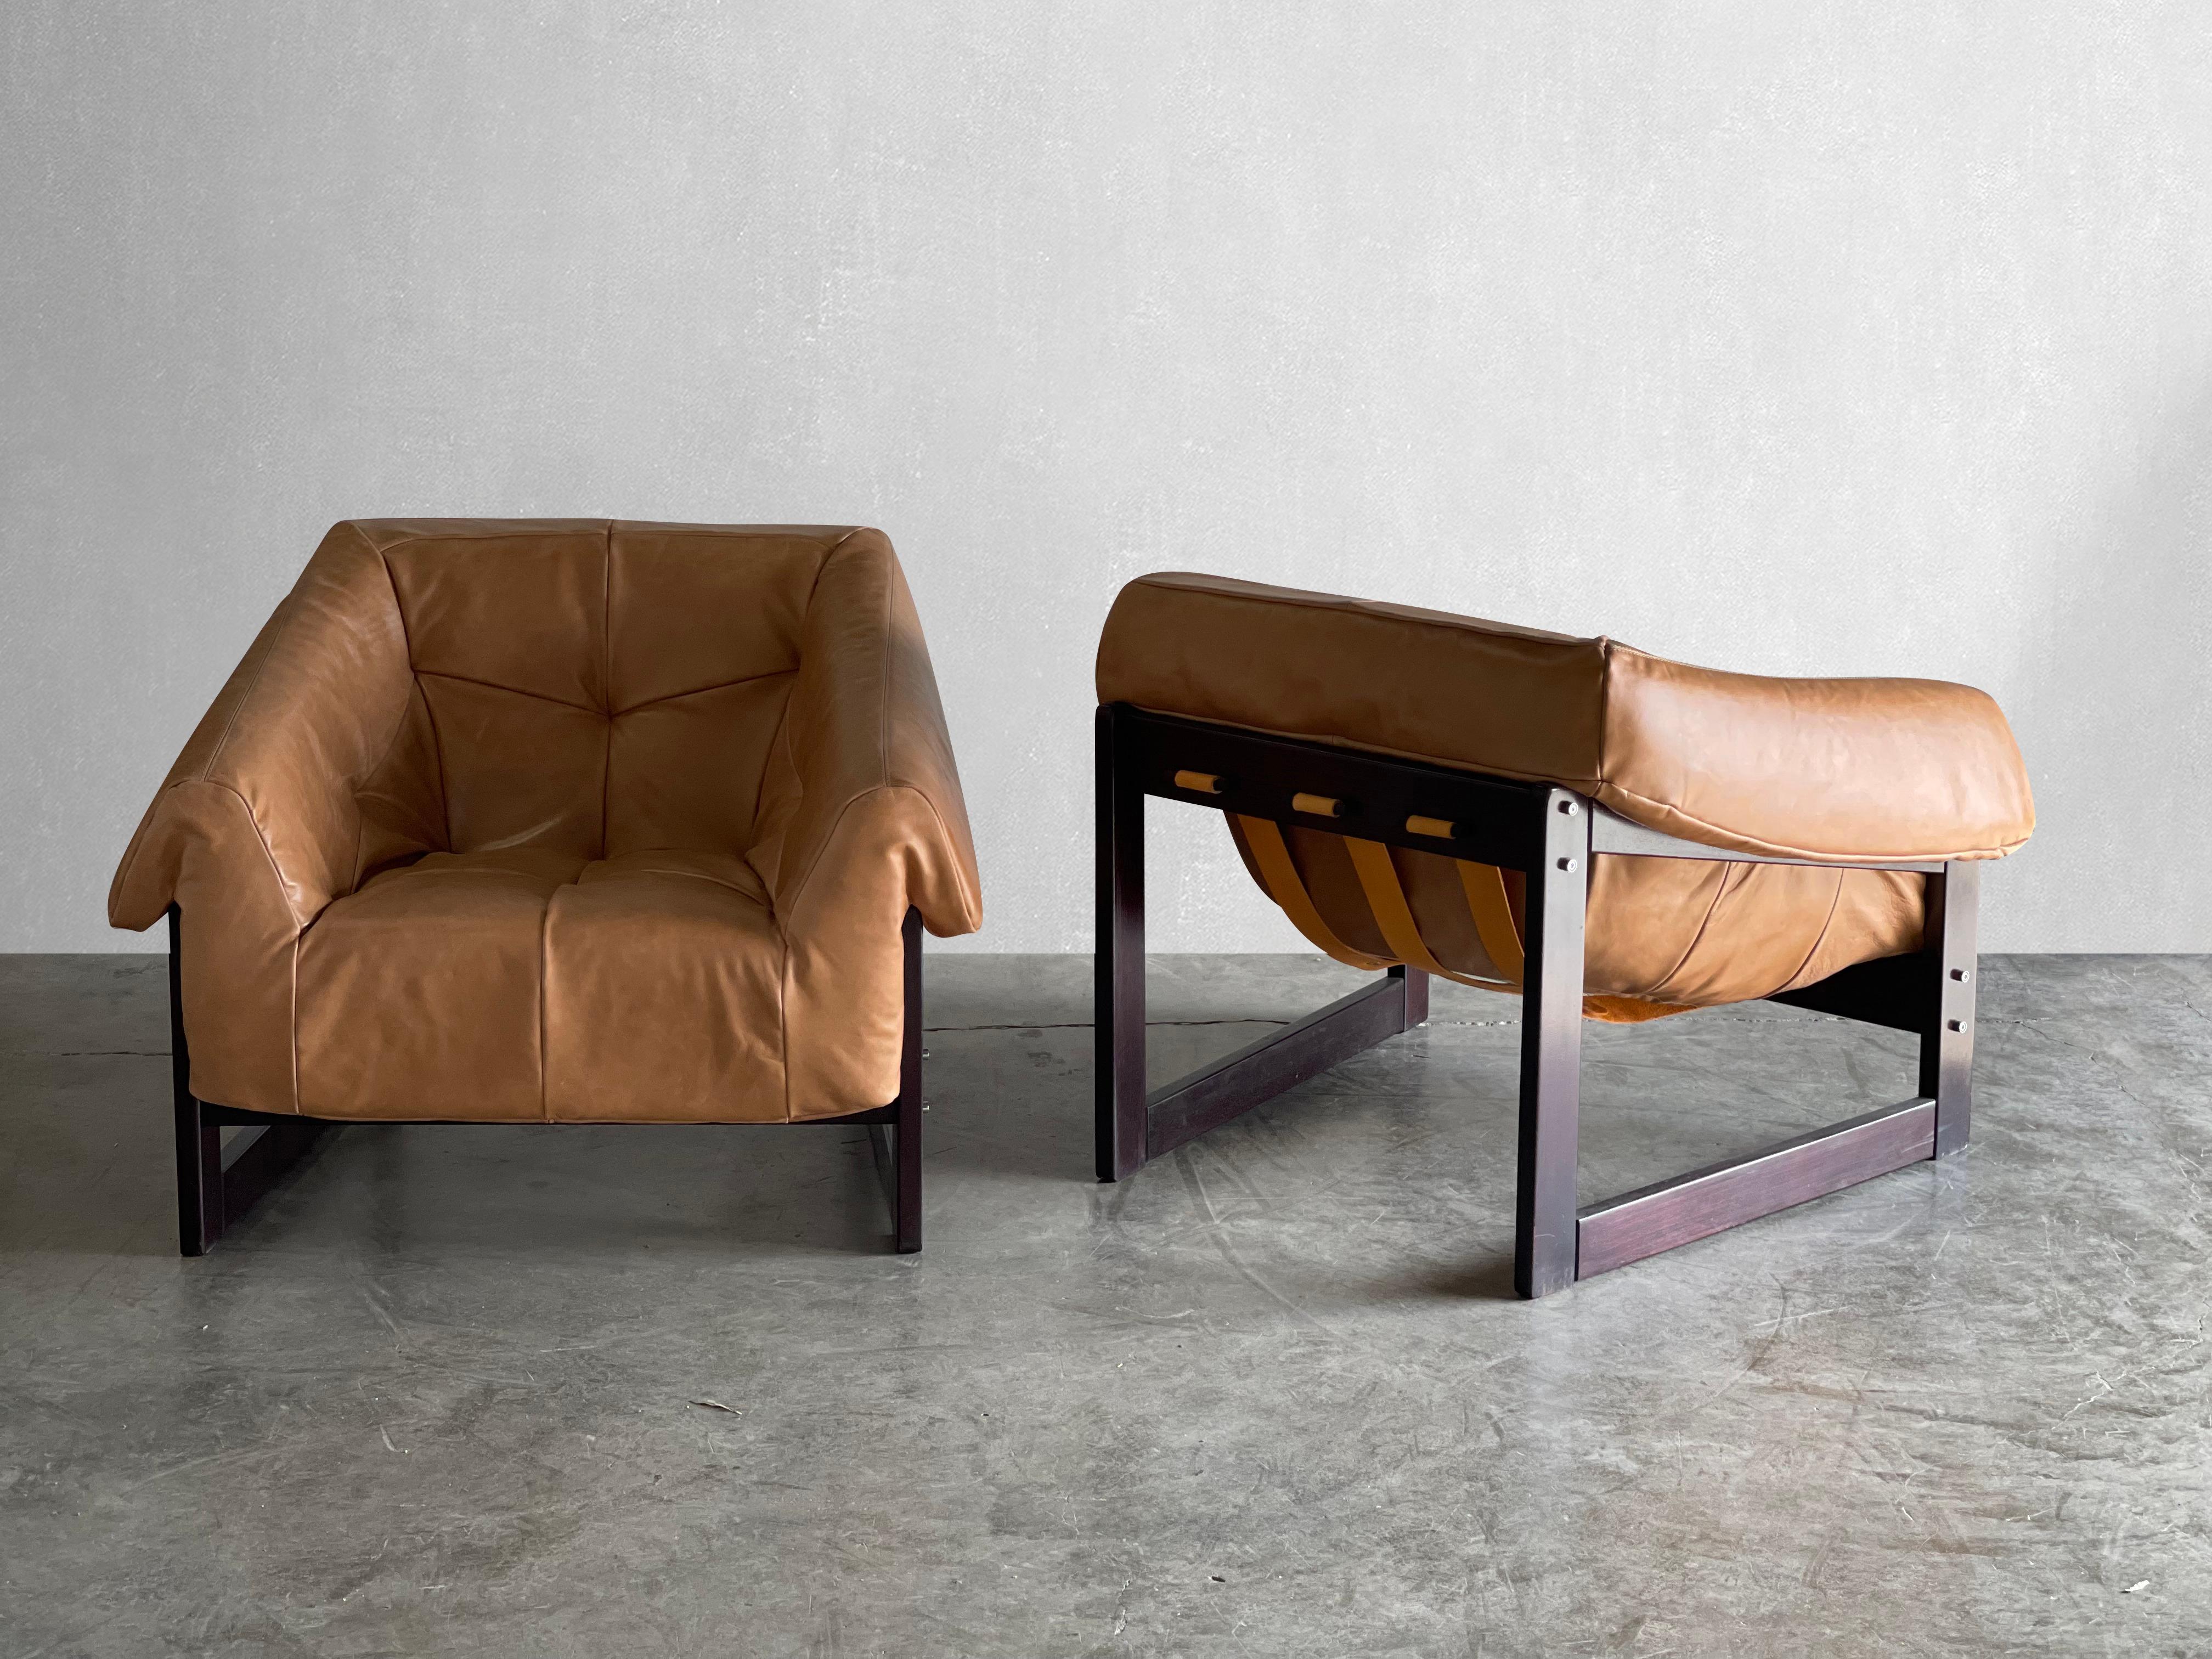 C. 1970s

Percival Lafer was one of the most prolific designers of the Brazilian midcentury period.

The tufted camel leather cushion sits on sturdy leather straps, which are attached to the jacaranda rosewood frame with dowels.

The seat and